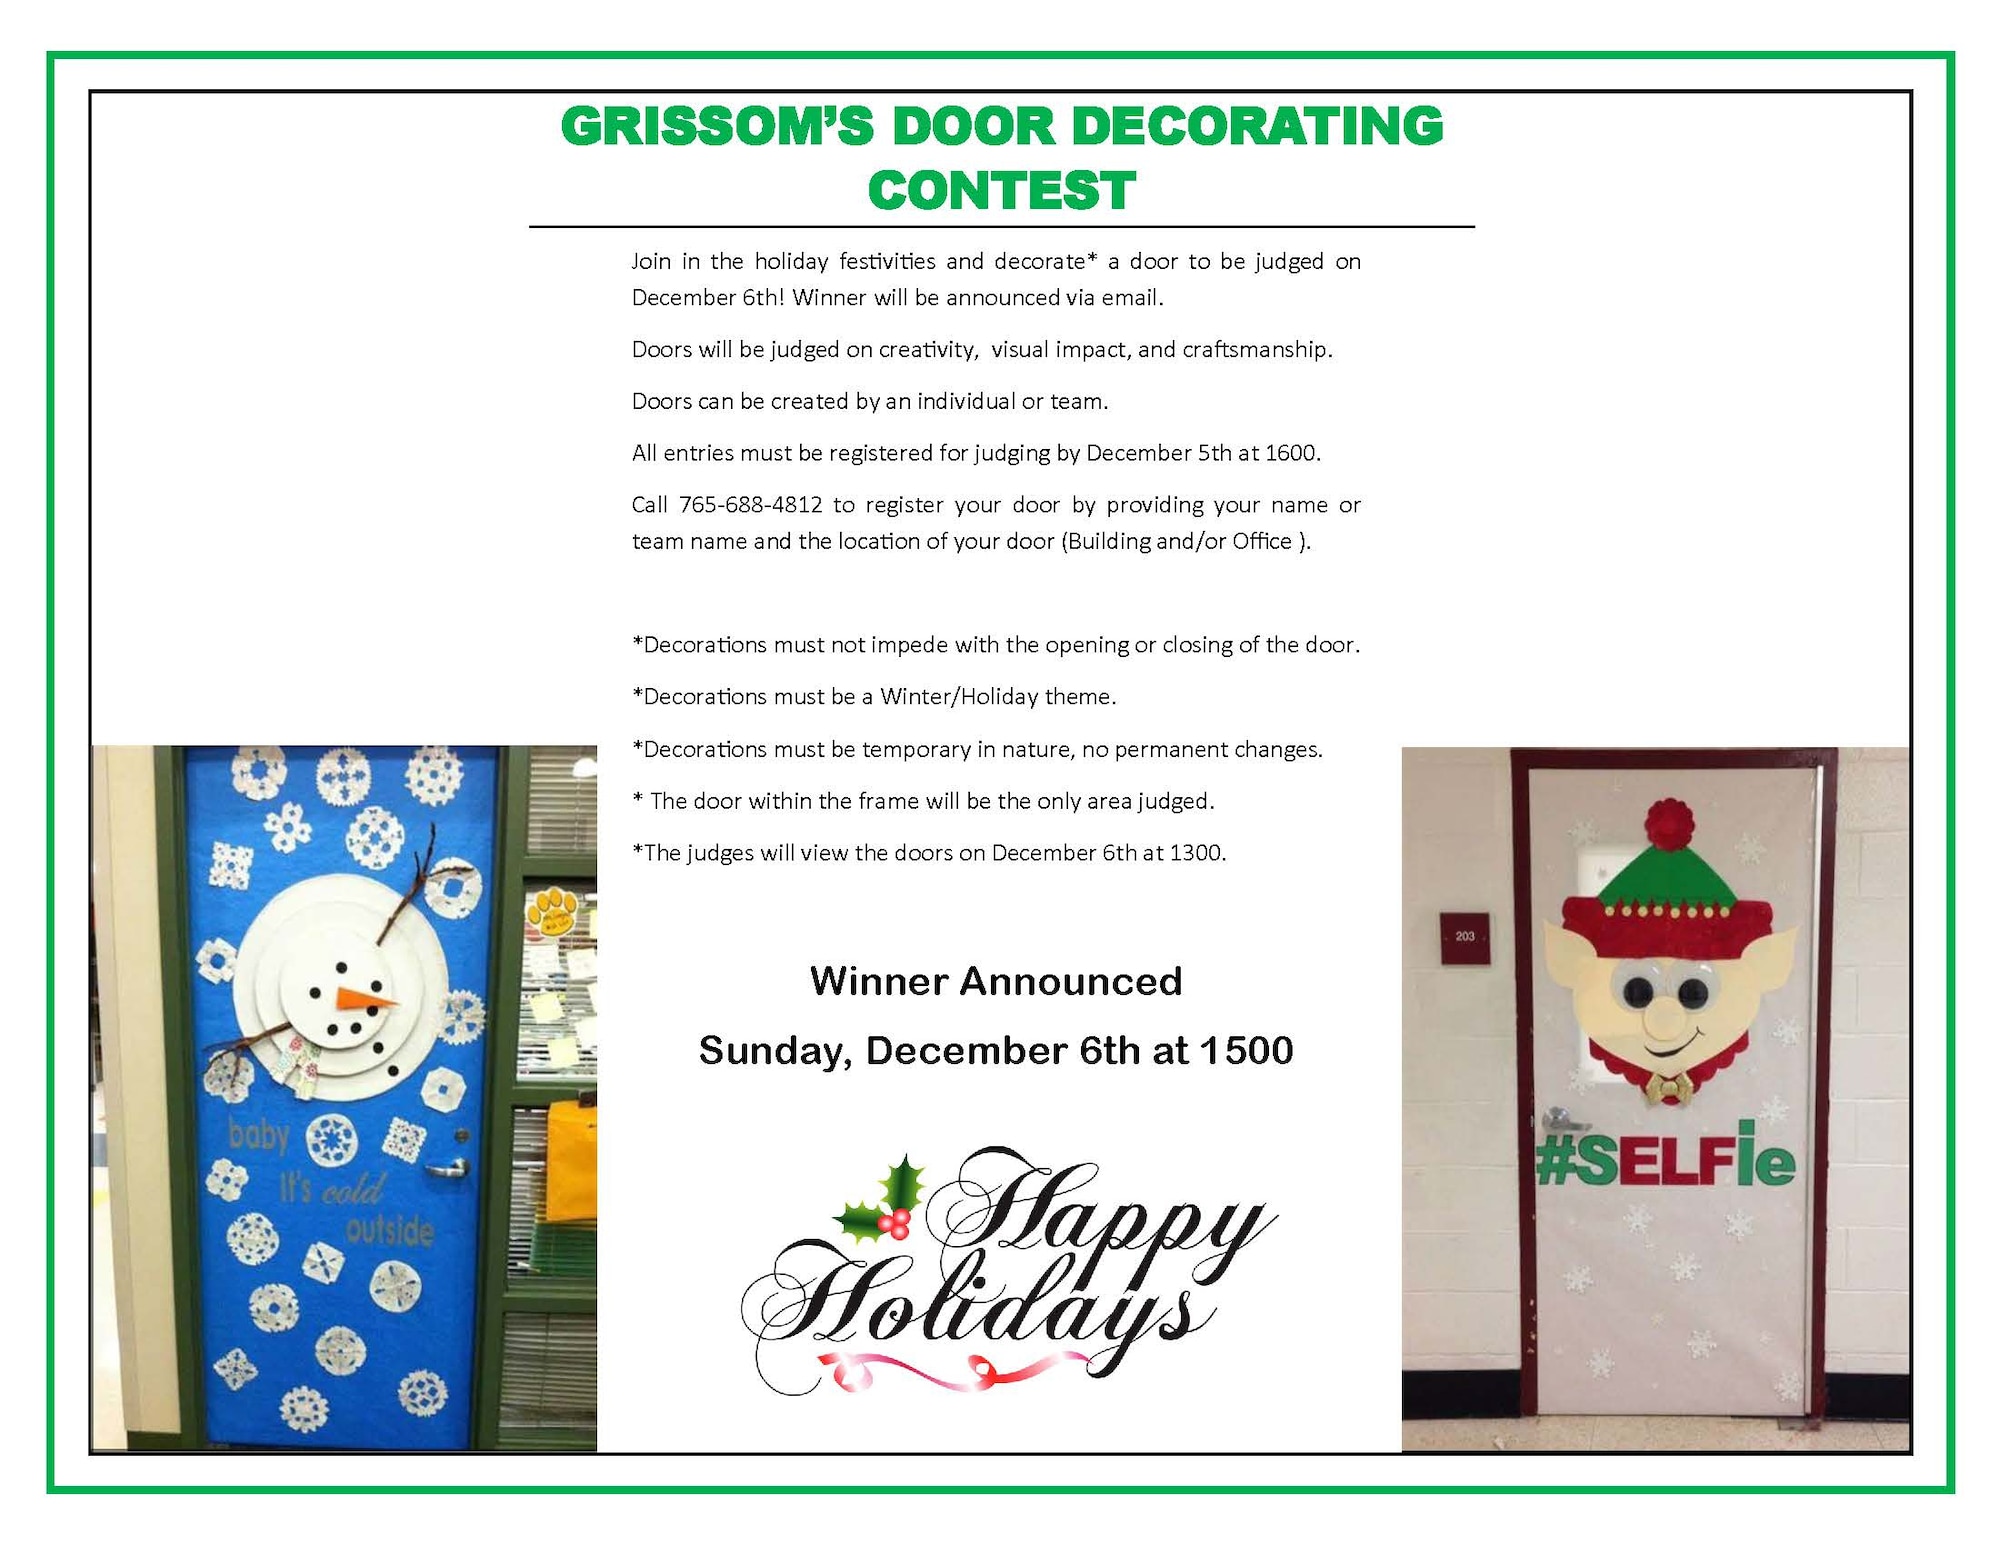 The Airman & Family Readiness Center is hosting its annual holiday door decorating contest at Grissom Air Reserve Base, Indiana. The judging for the contest will be held Dec. 6th by members from Grissom’s Key Spouse program. (U.S. Air Force Graphic)